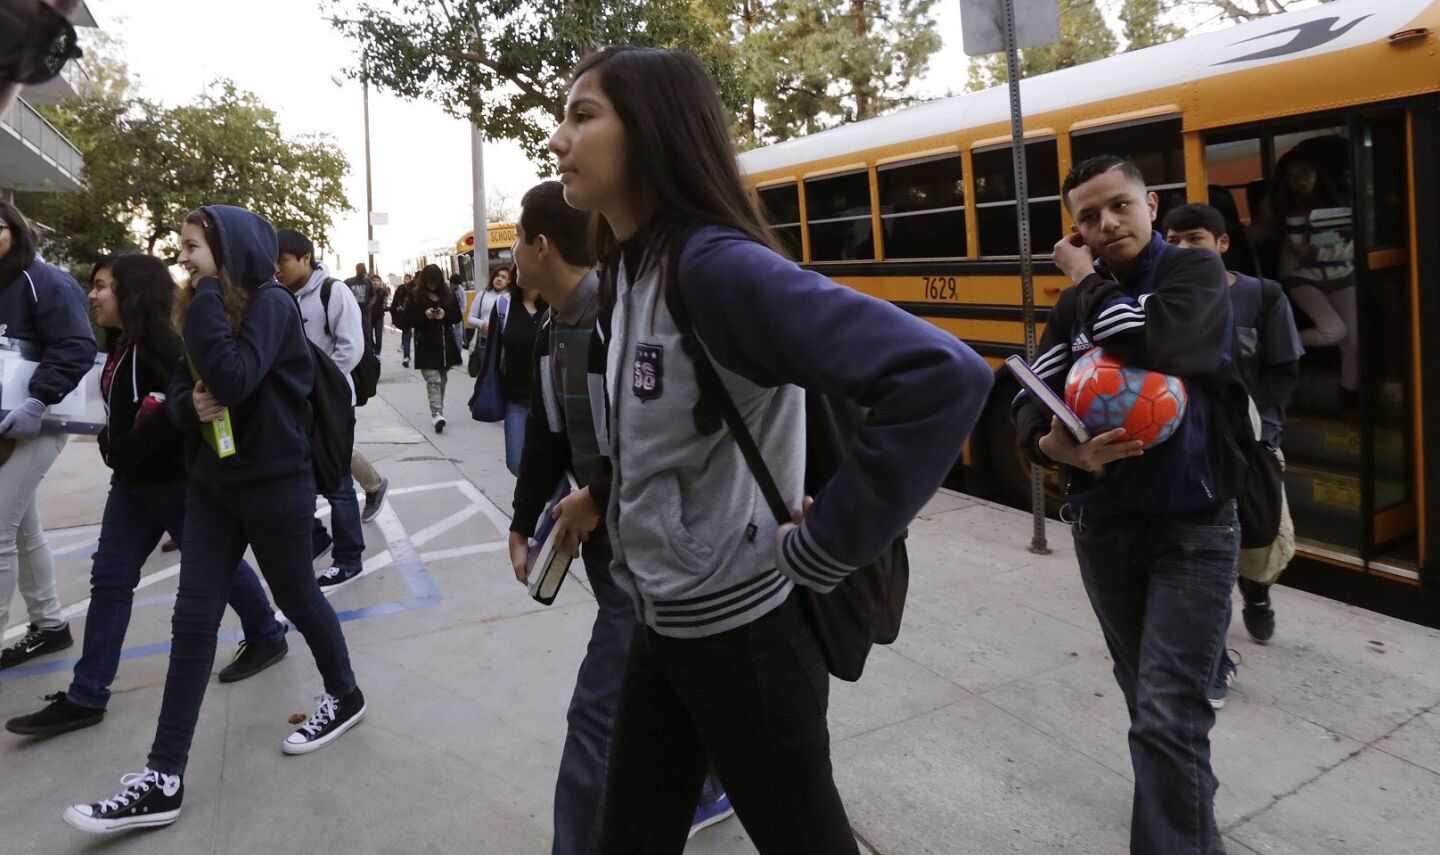 Students return to Franklin High School in Highland Park on Wednesday, a day after all LAUSD campuses were closed by a threat.